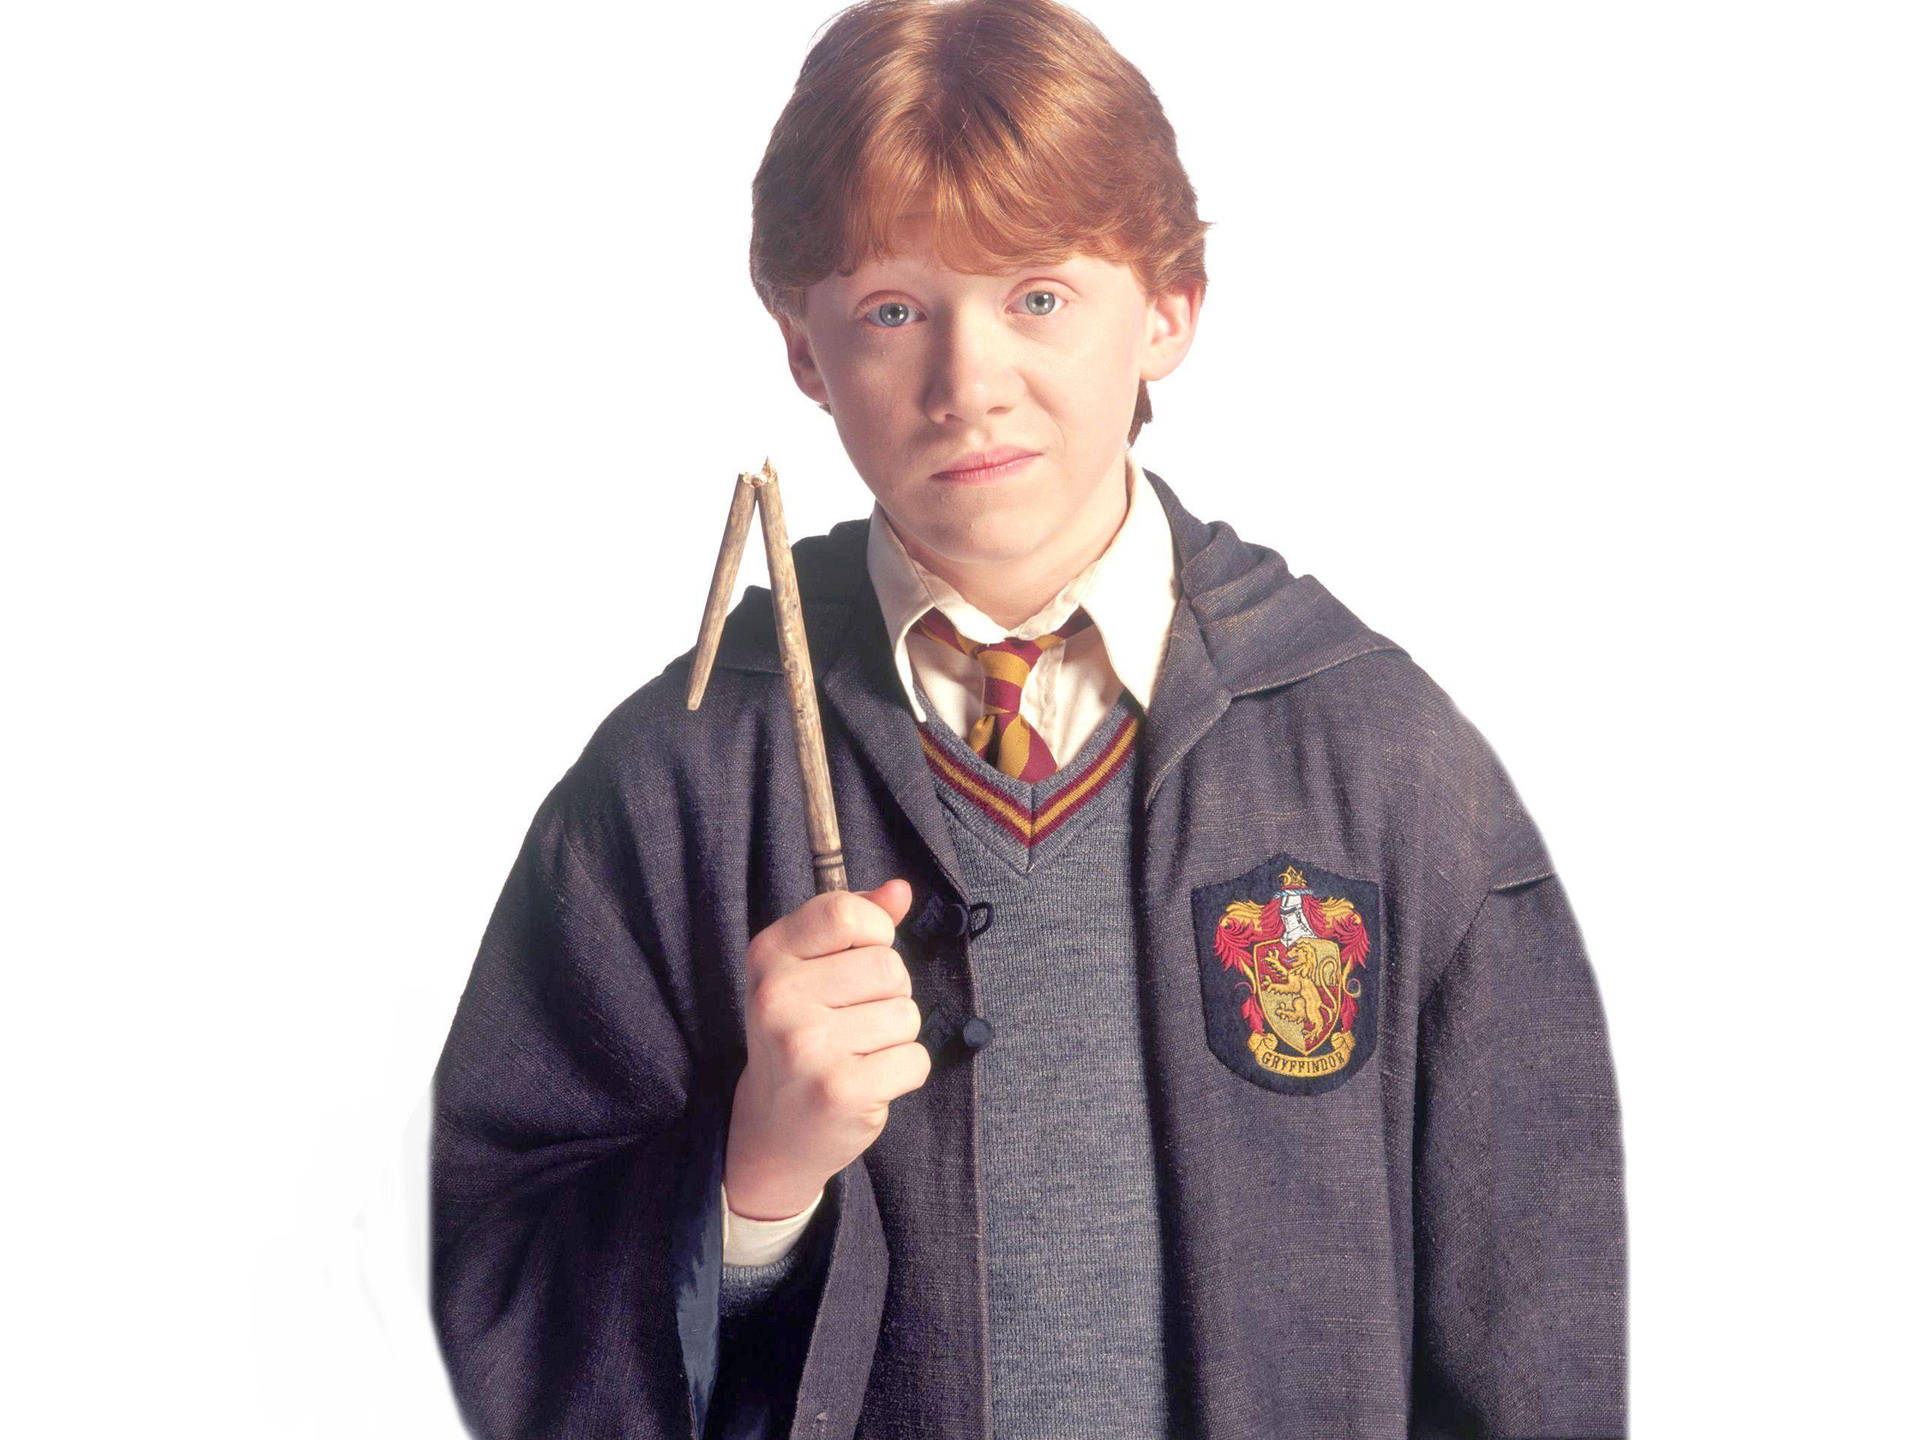 Ron Weasley Staring At His Broken Wand In Frustration Background